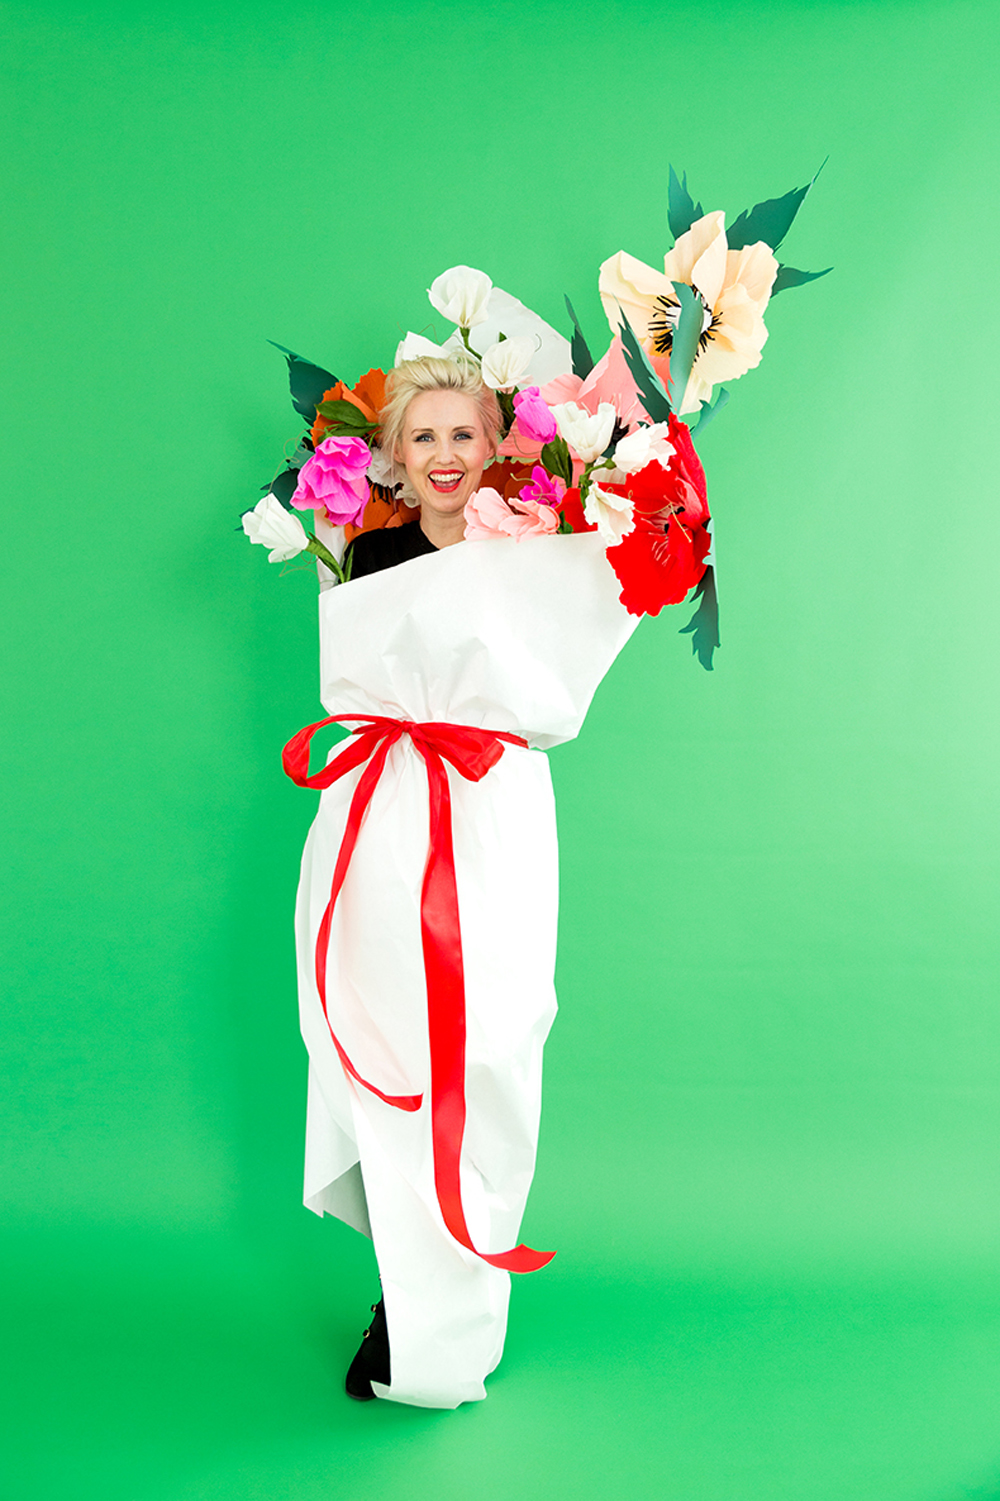 bouquet-of-flowers-costume-10